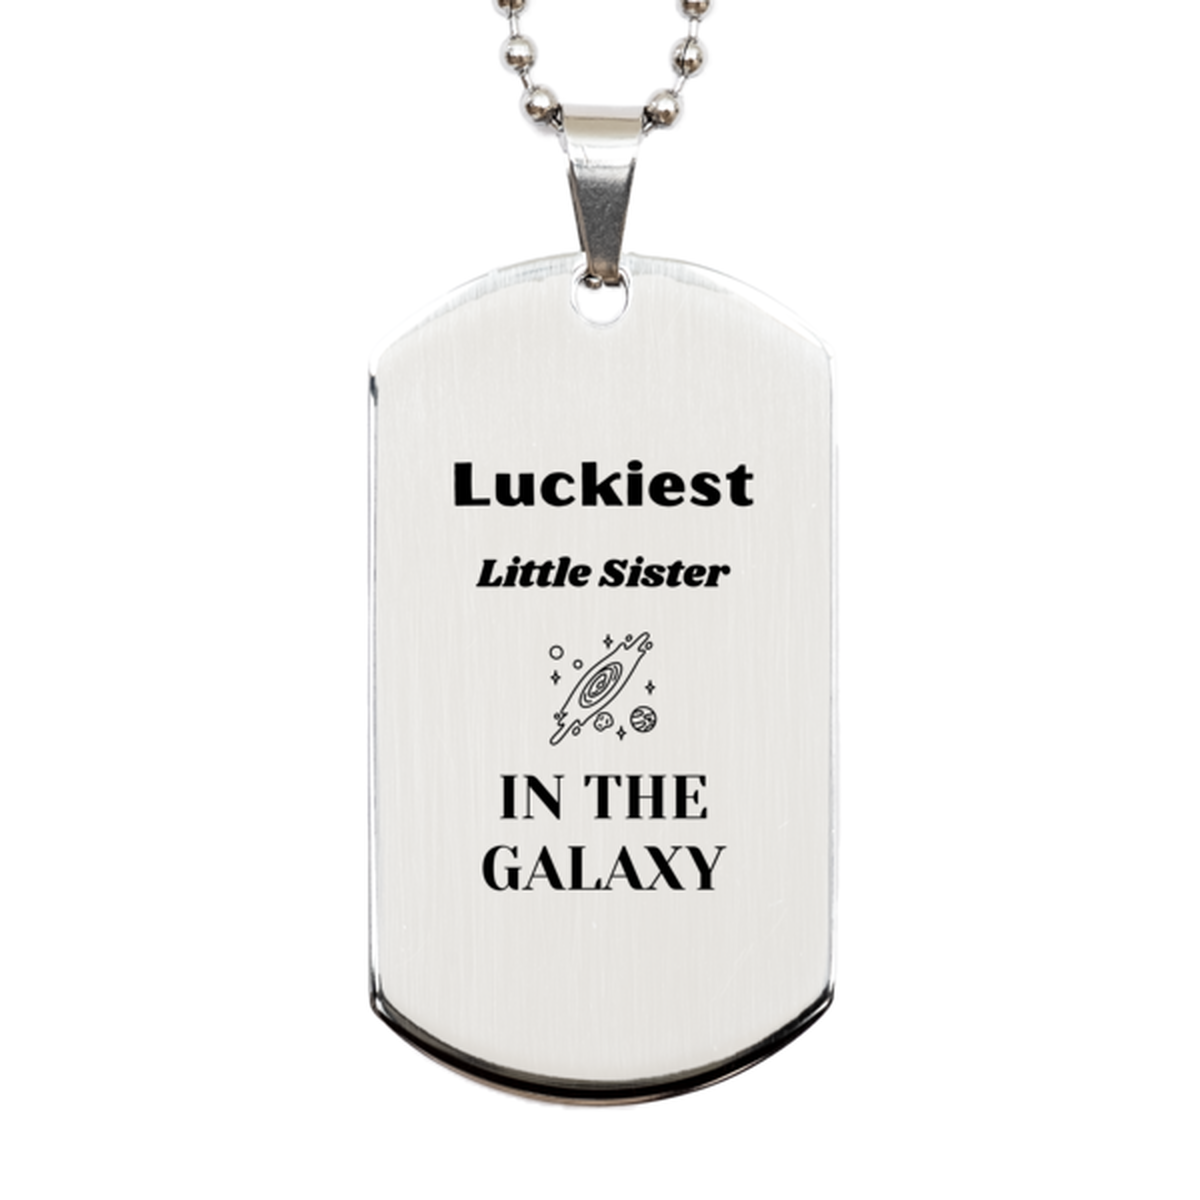 Luckiest Little Sister in the Galaxy, To My Little Sister Engraved Gifts, Christmas Little Sister Silver Dog Tag Gifts, X-mas Birthday Unique Gifts For Little Sister Men Women